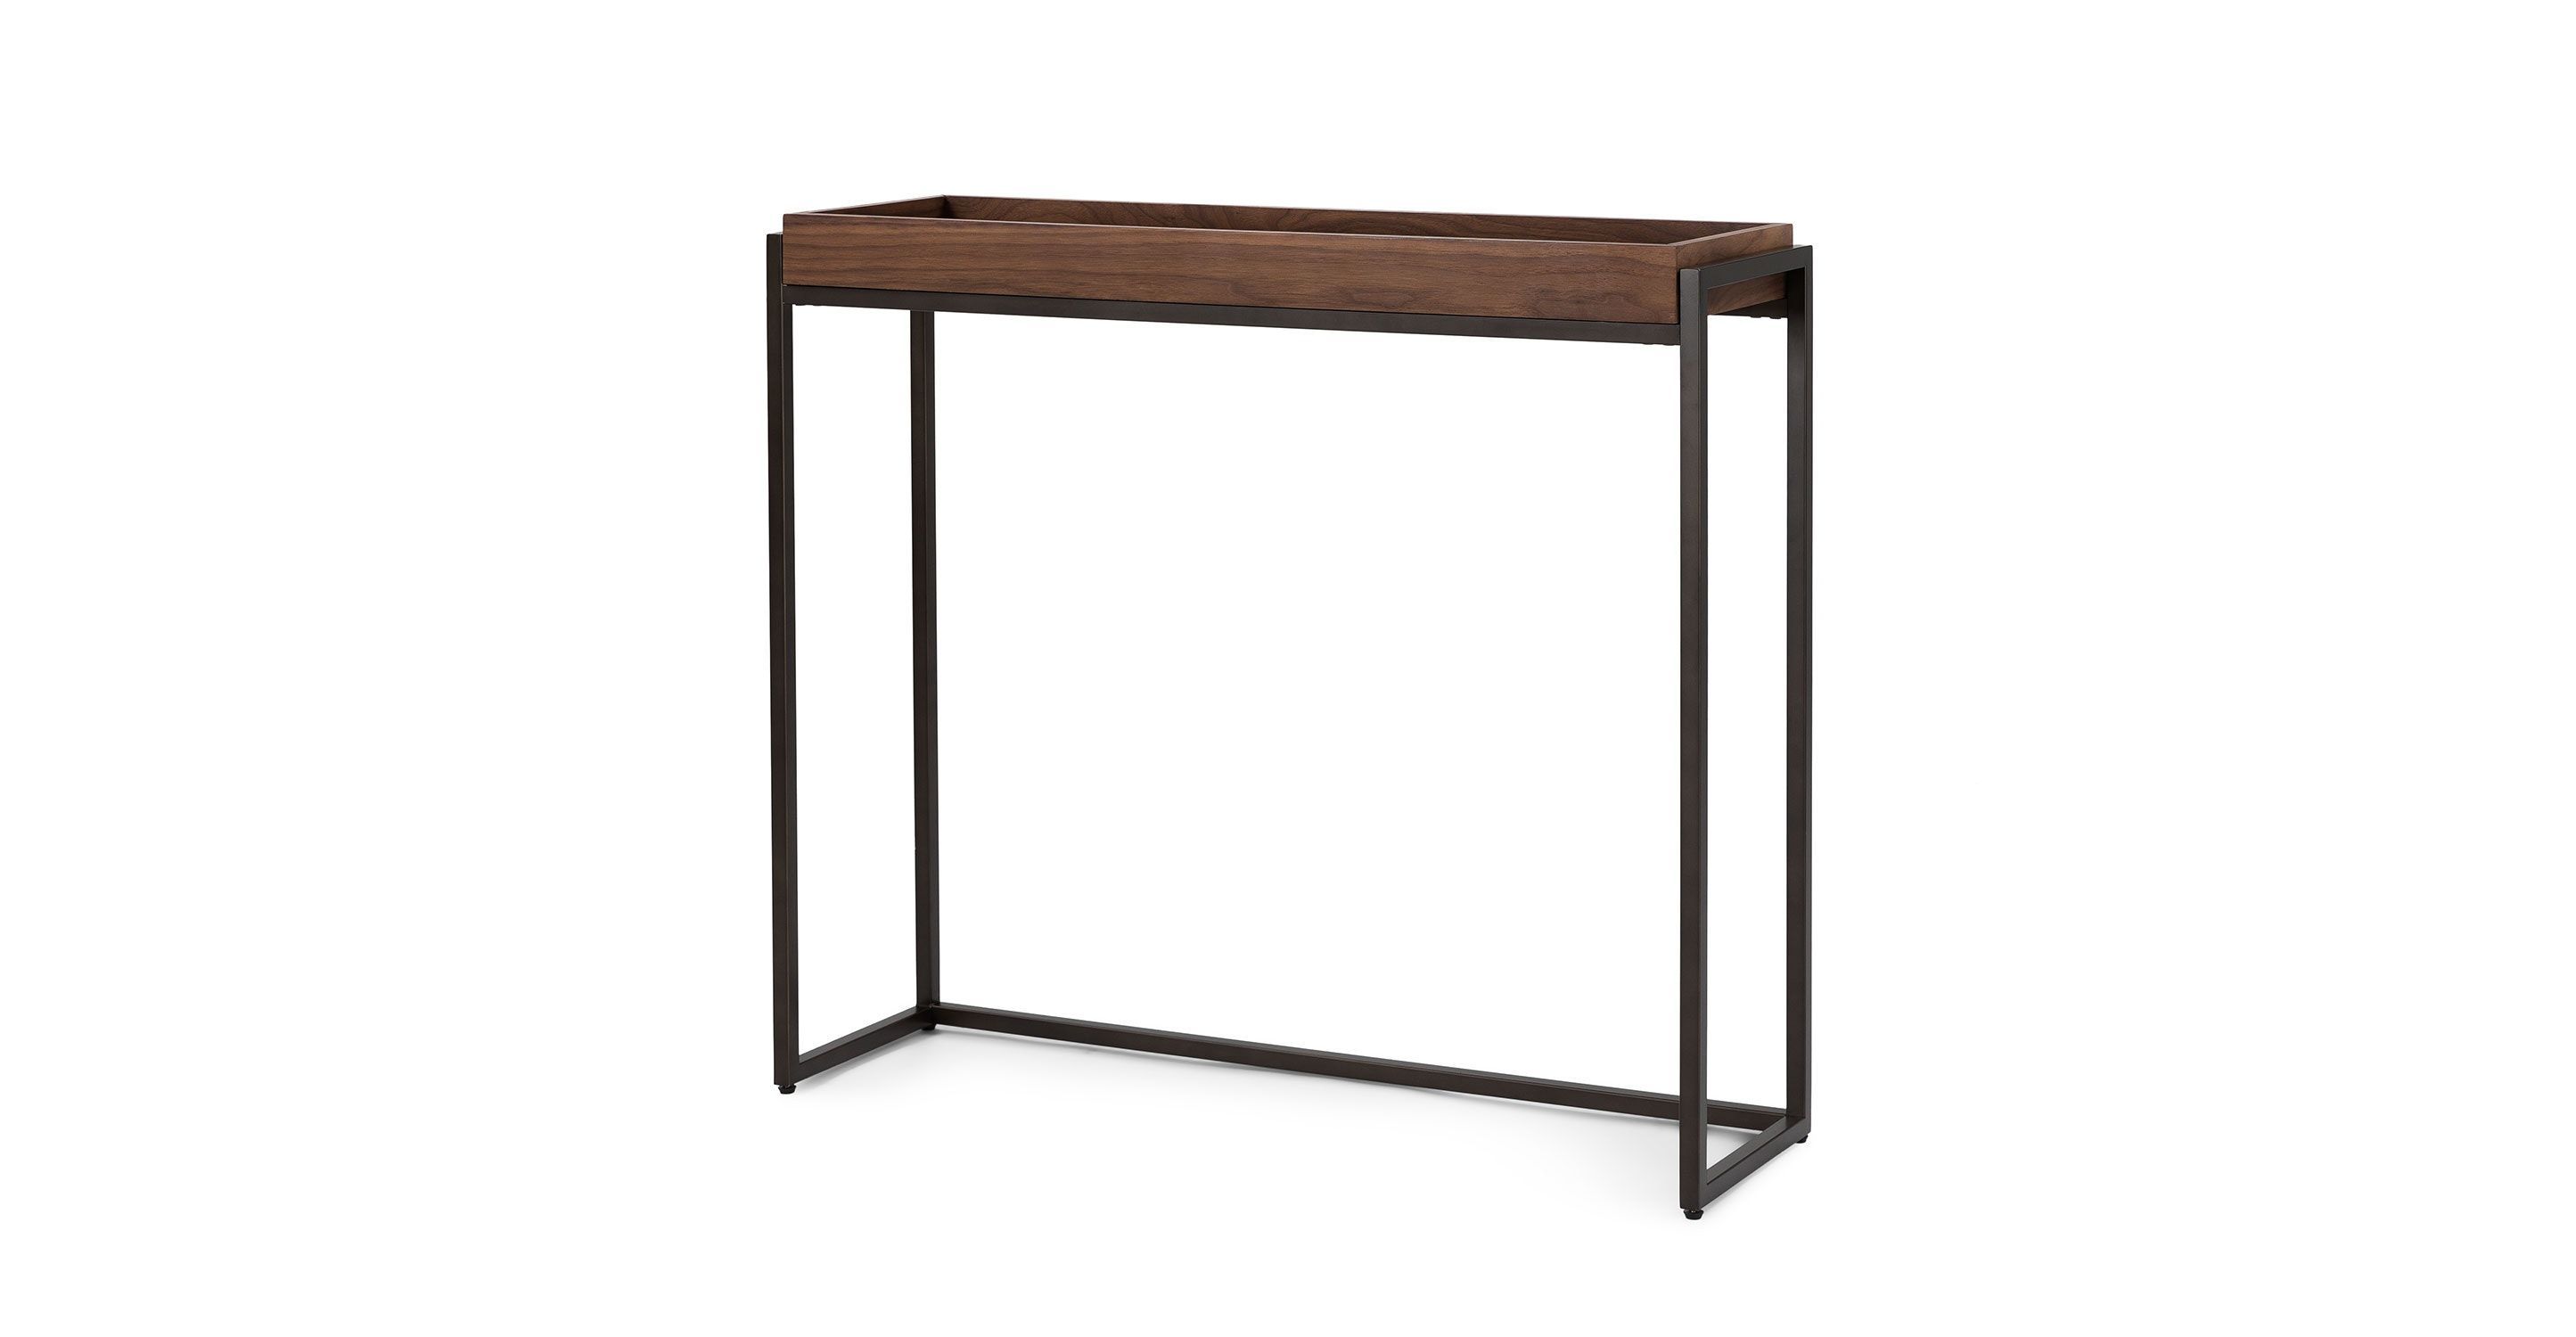 Oscuro Walnut Console With Regard To Parsons Walnut Top & Dark Steel Base 48x16 Console Tables (View 29 of 30)